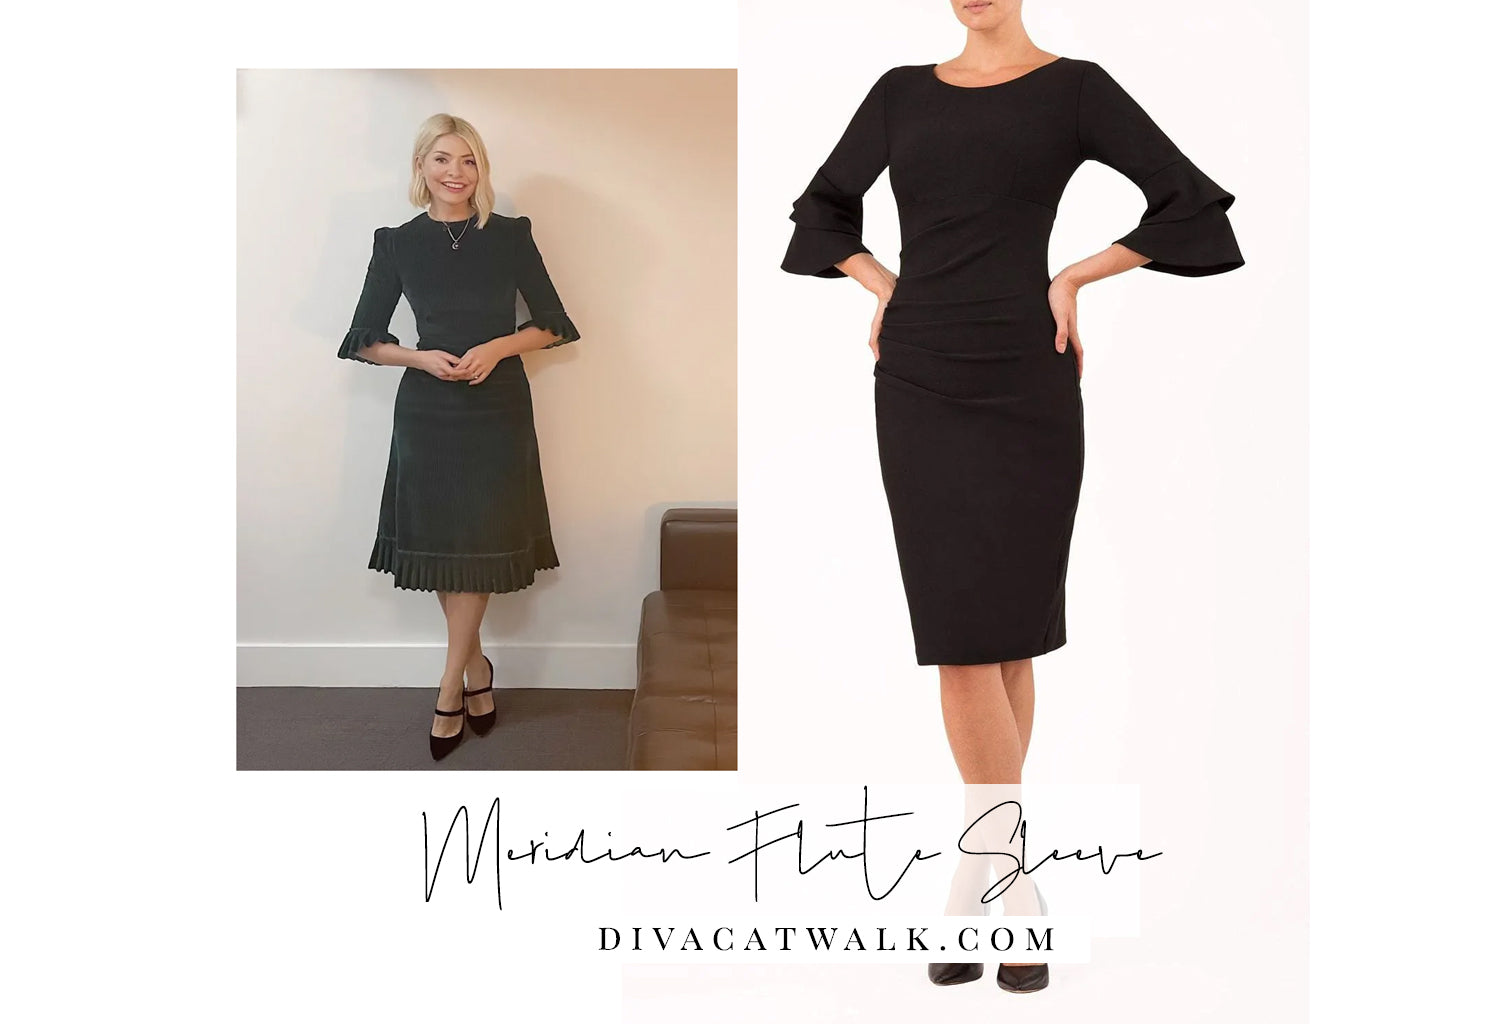  holly willoughby pictured in an black dress with flute sleeves, with an attached image of a similar dress available from Diva Catwalk.